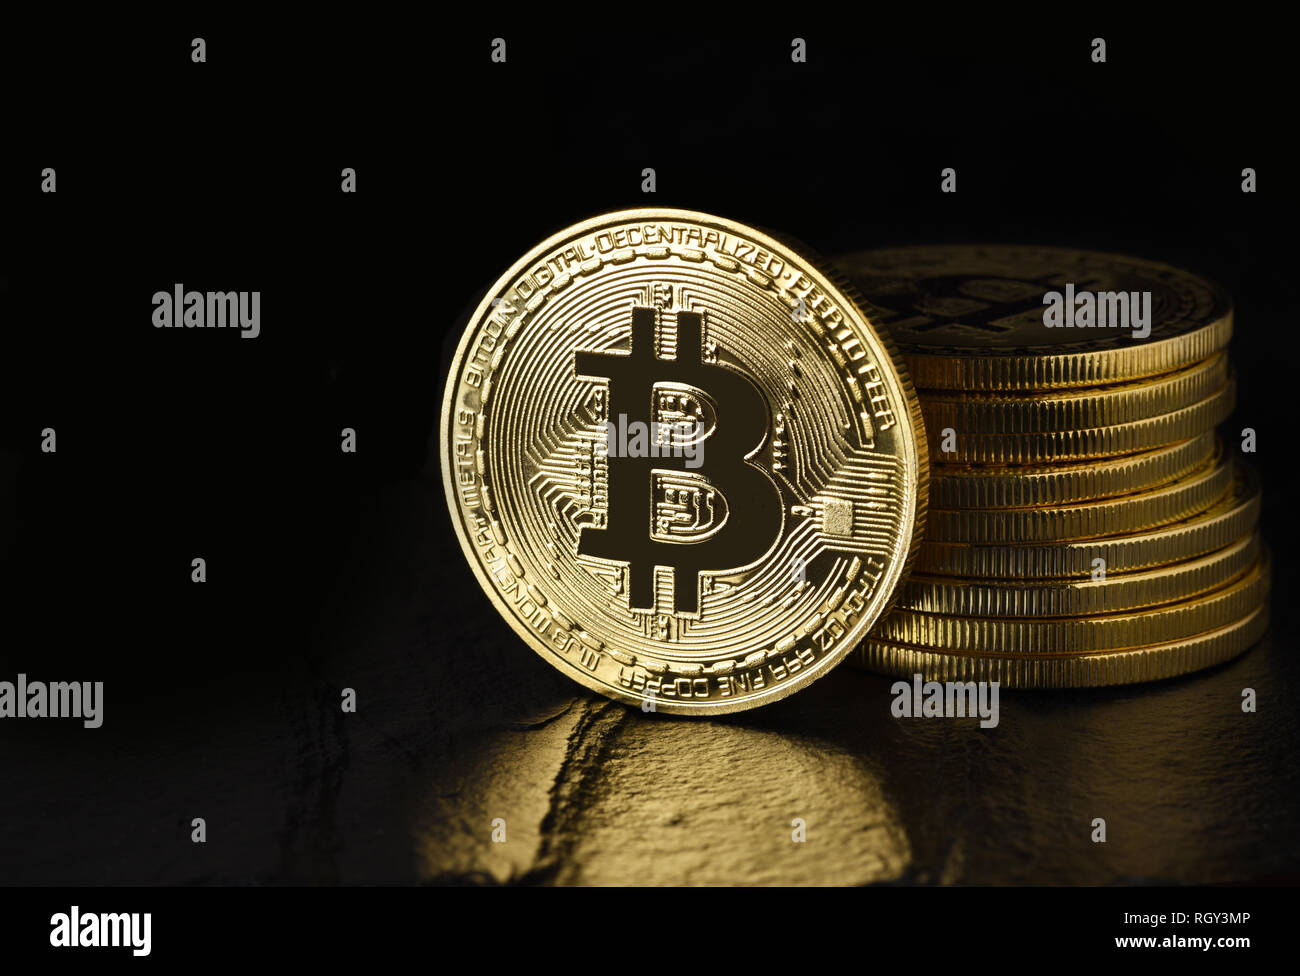 Bitcoin: Physical bit coin aslo called Digital Currency or Cryptocurrency, on edge standing in front of a stack, on black with reflection and copy spa Stock Photo